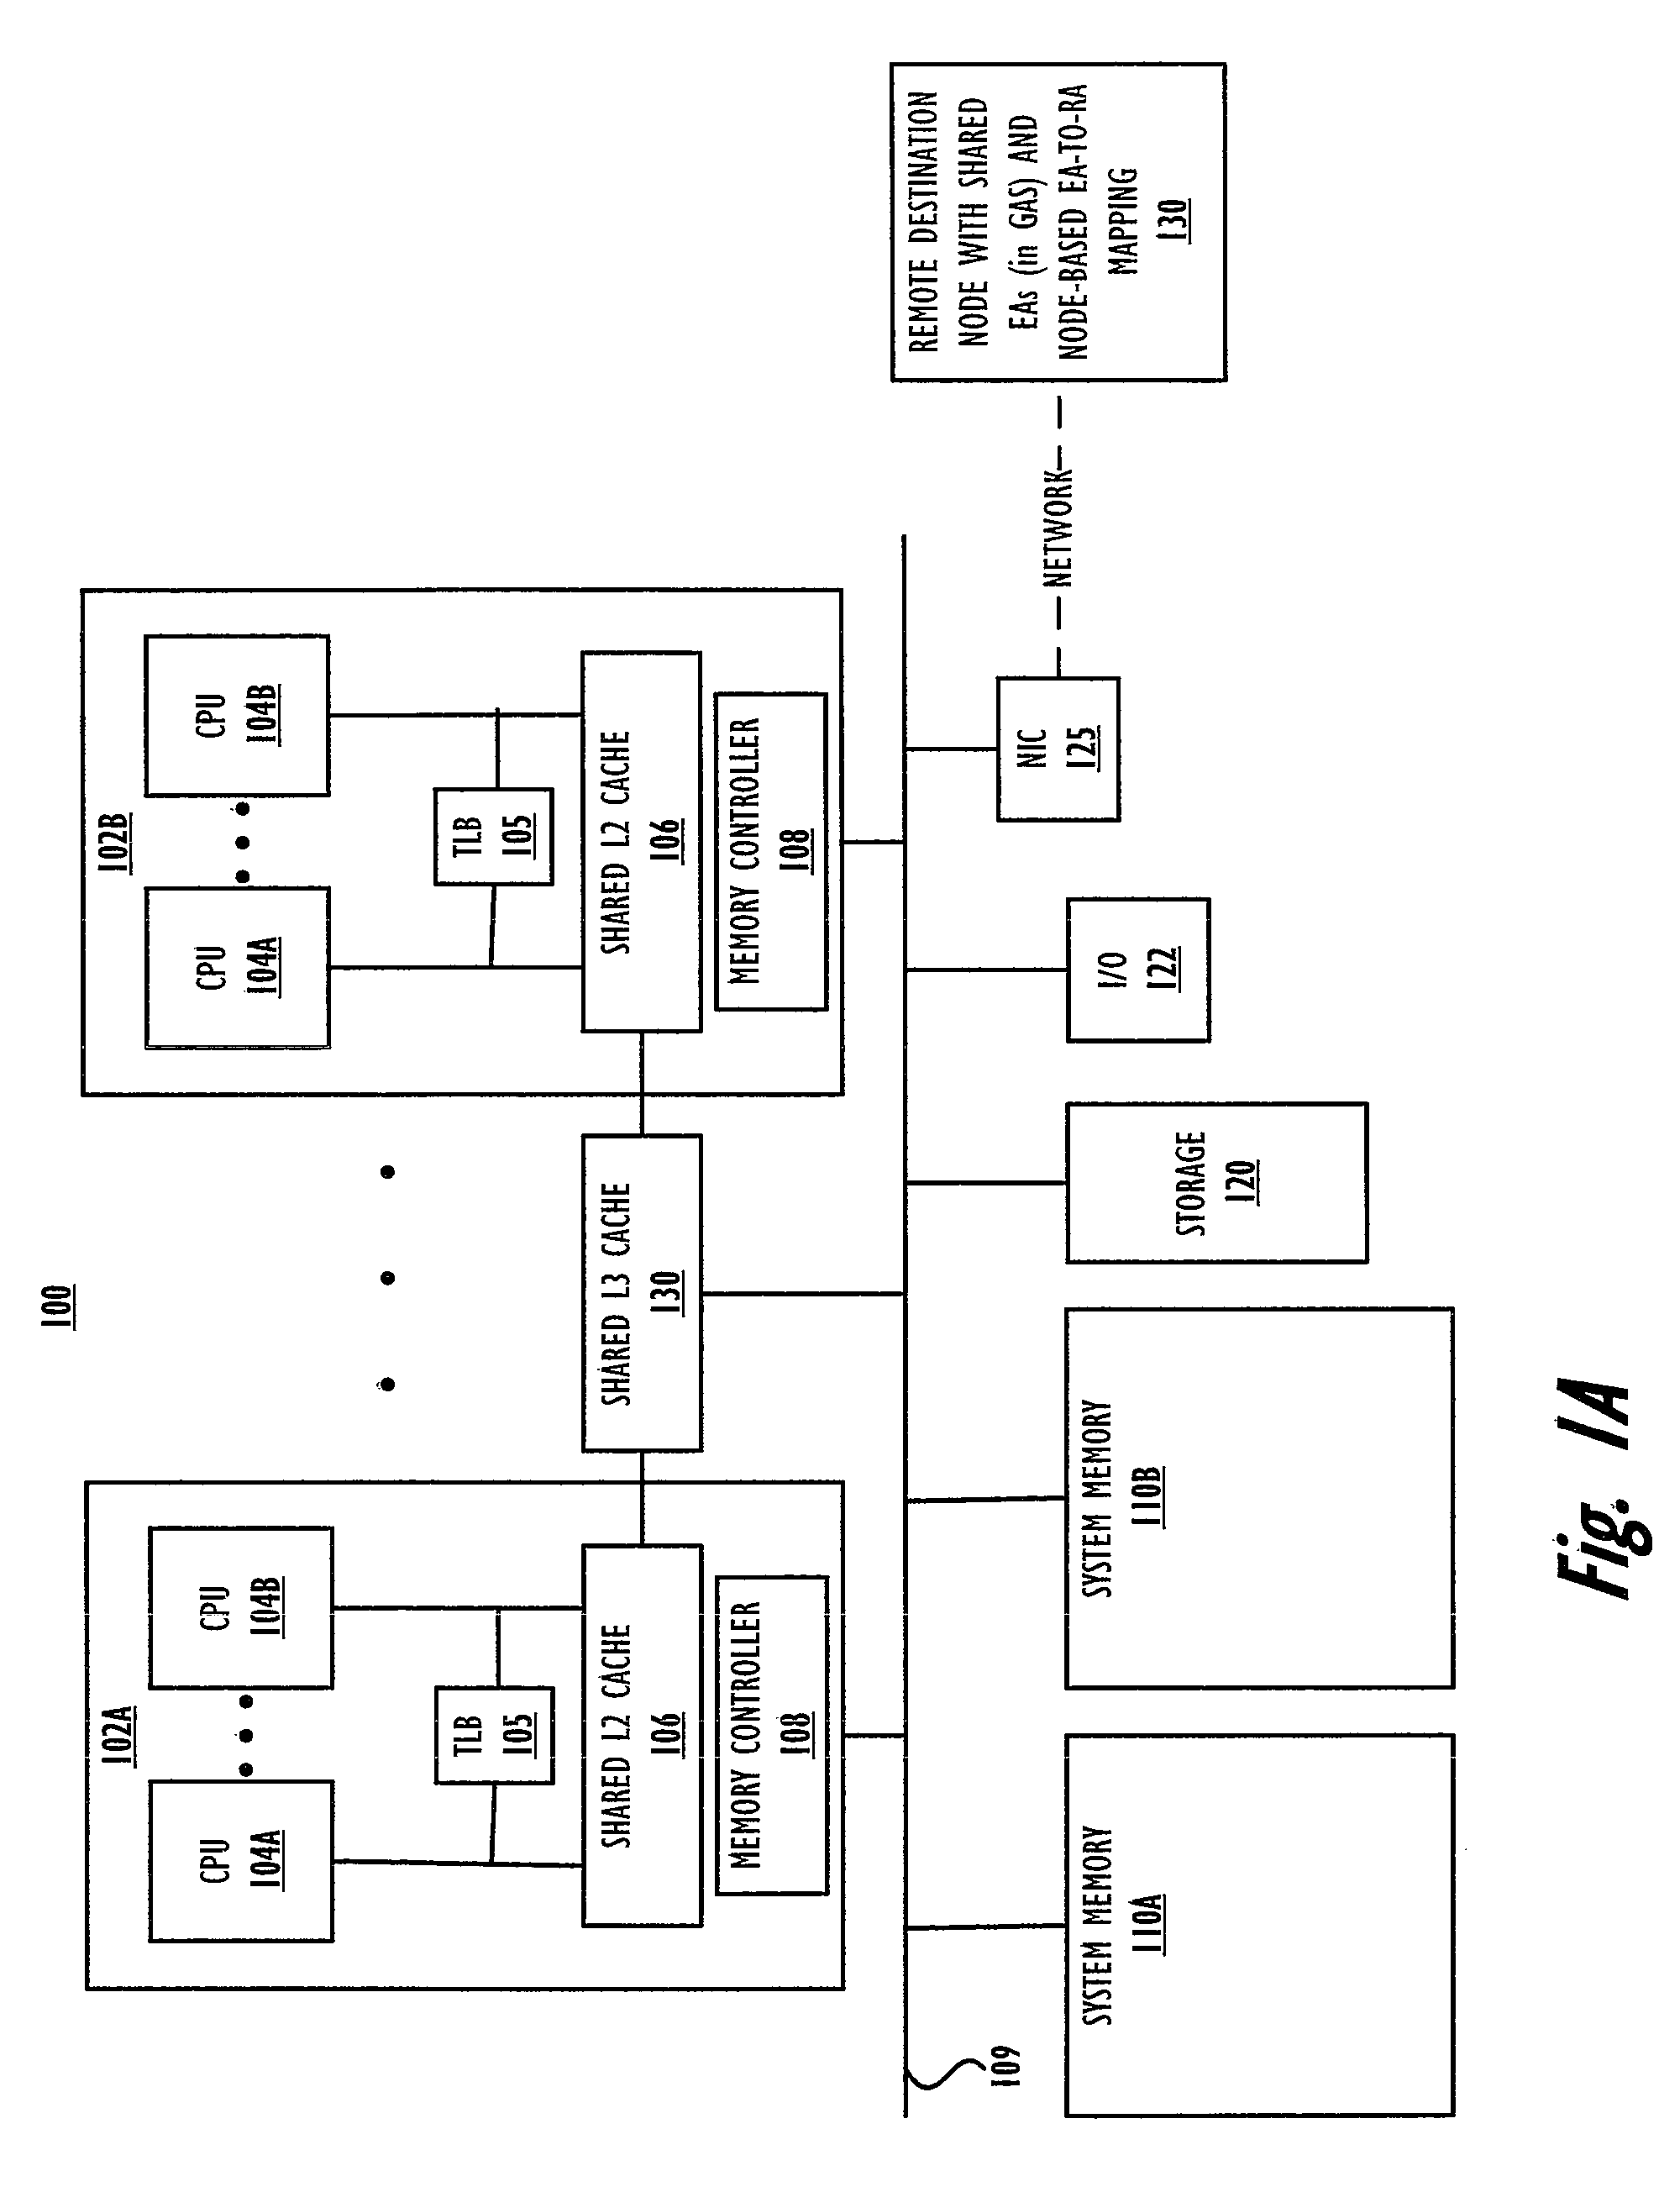 Completion of asynchronous memory move in the presence of a barrier operation